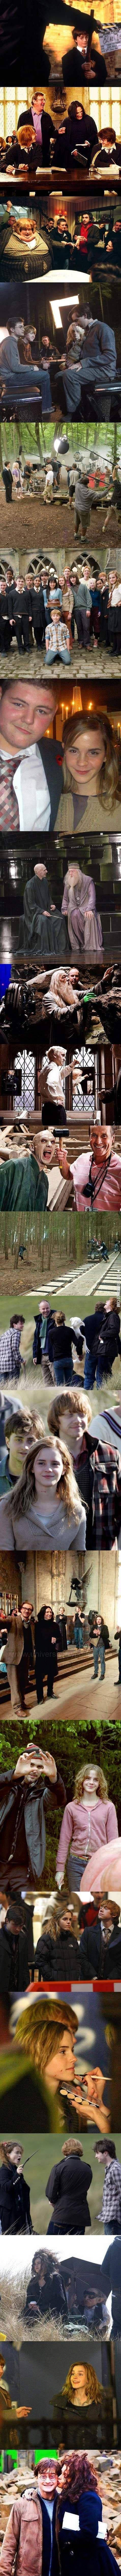 Behind+the+scenes+of+Harry+Potter.